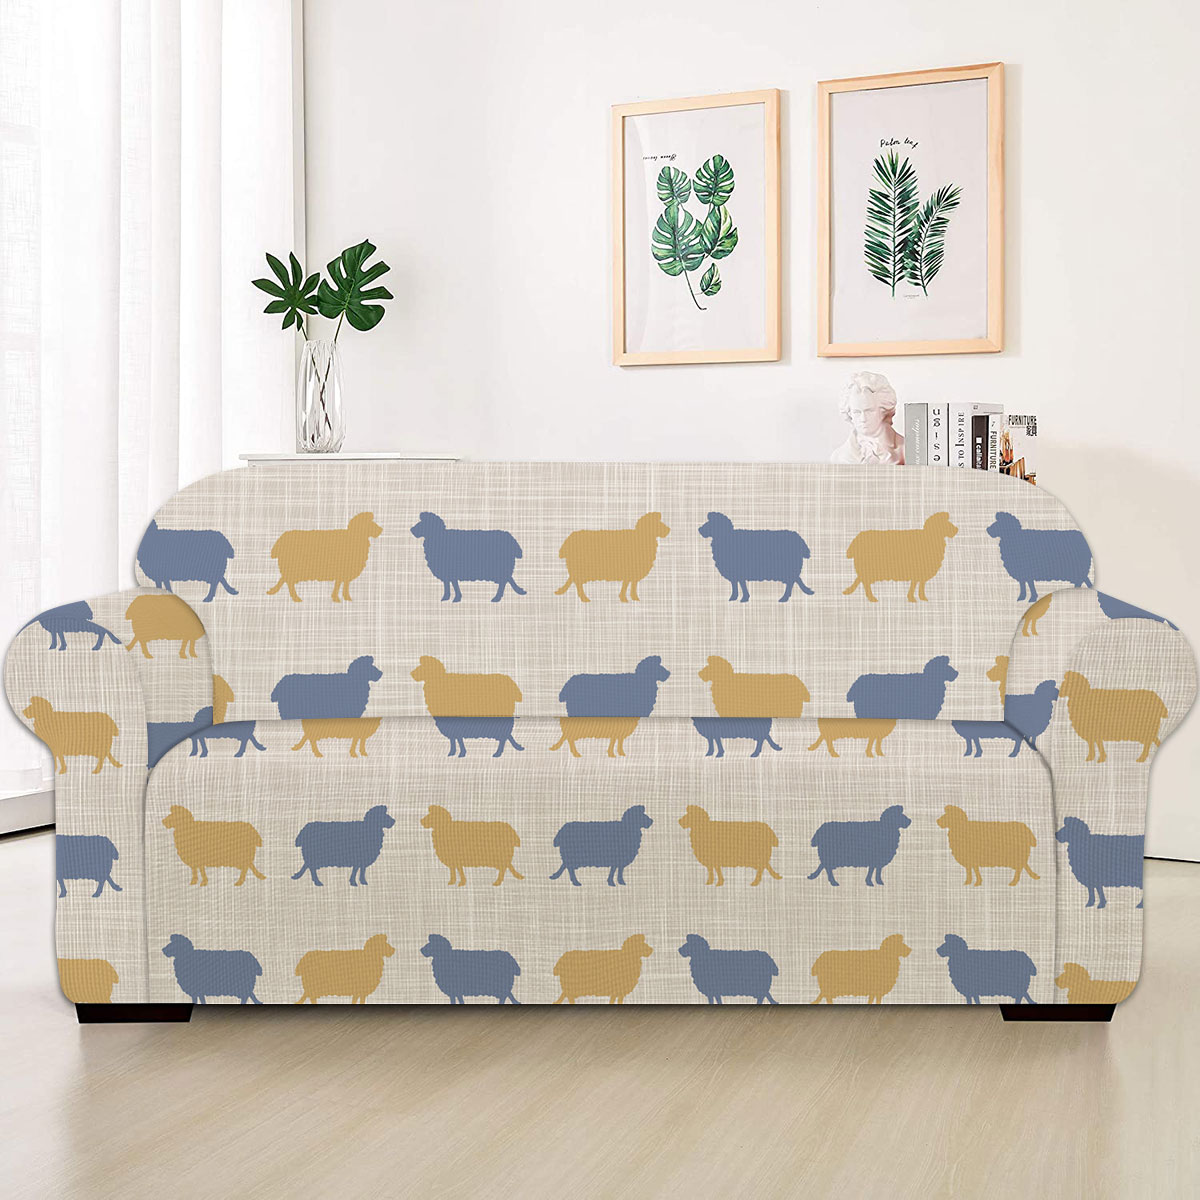 Sheep Silhouette Pattern Sofa Cover